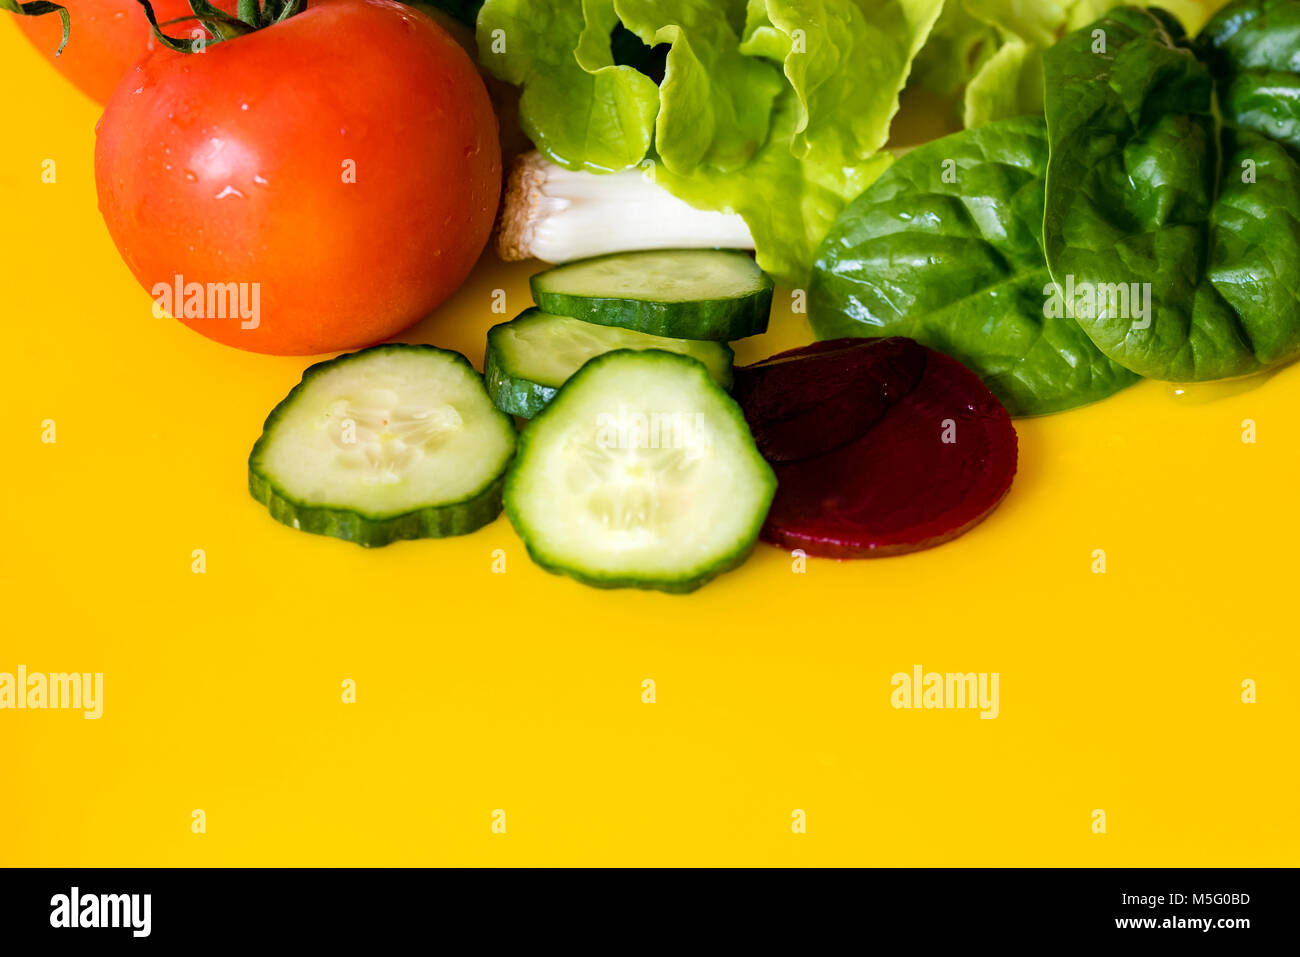 Fresh colourful salad ingredients, yellow background, room for text. Lettuce, spring onion, tomato, beetroot and cucumber slices, closeup. Stock Photo